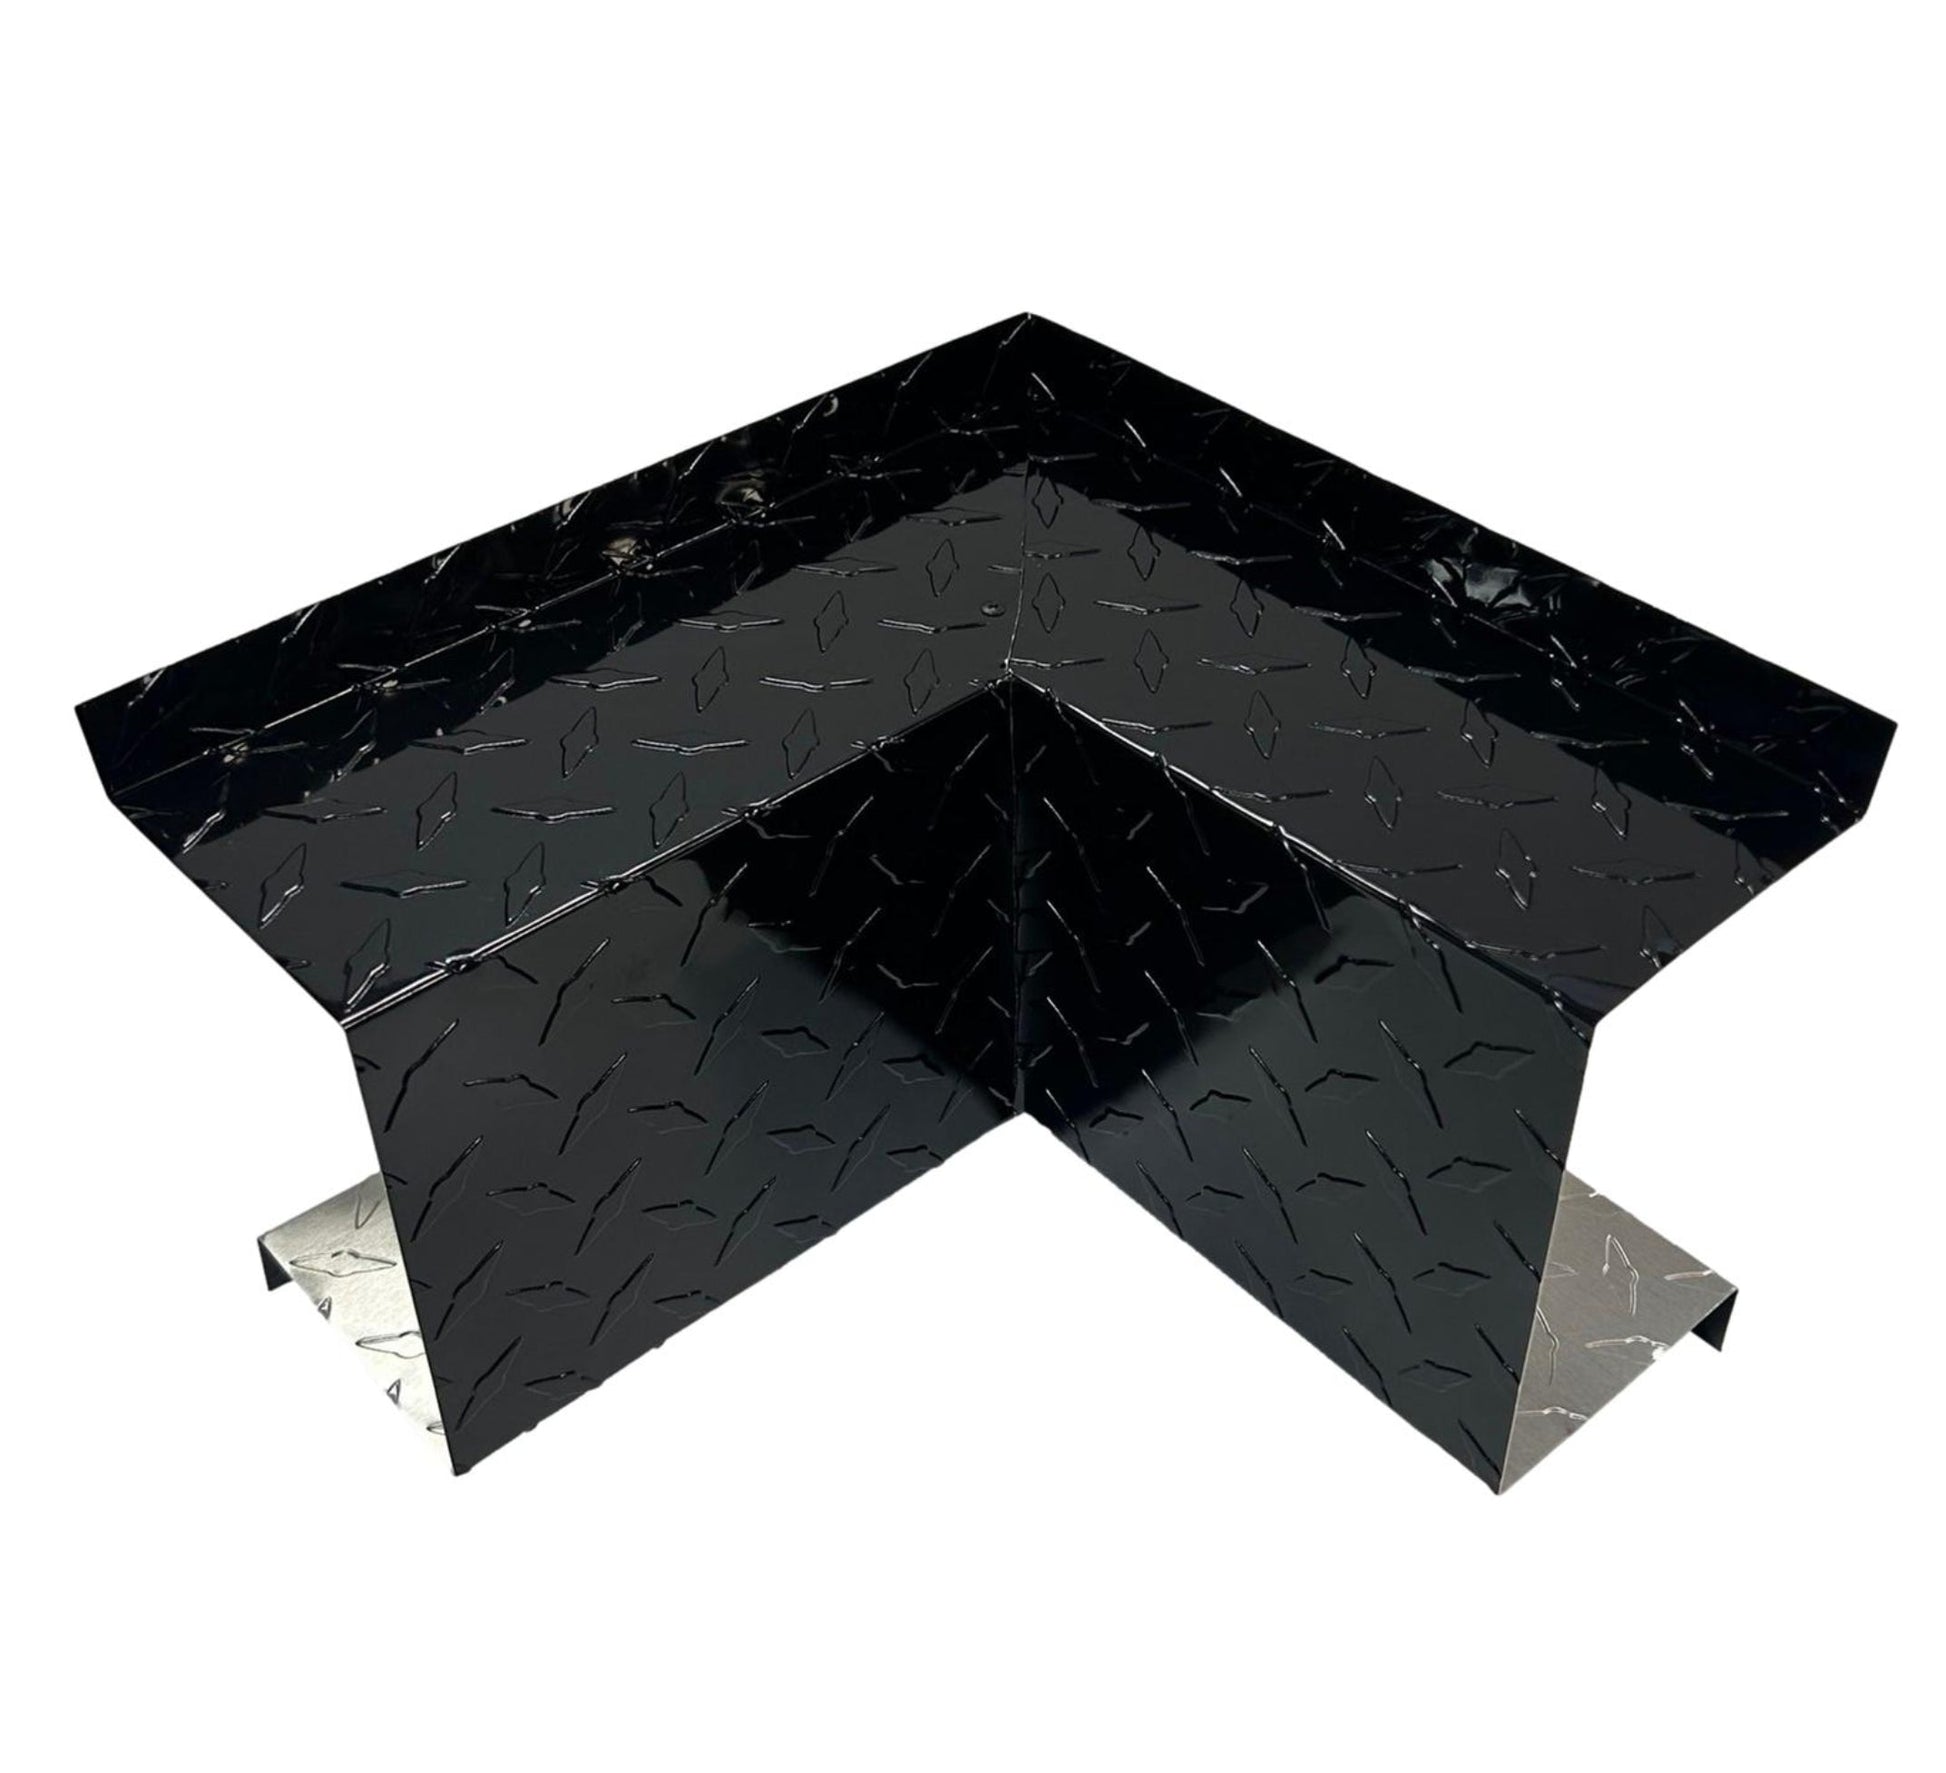 A black, metal Residential Series - Line Set Cover Inside Corner Elbows - Premium Quality with a textured, diamond plate surface pattern, designed for use in construction or structural support applications. The Perma Cover product has a right-angle shape and reflective silver edges, making it ideal for HVAC installations and other structural tasks.